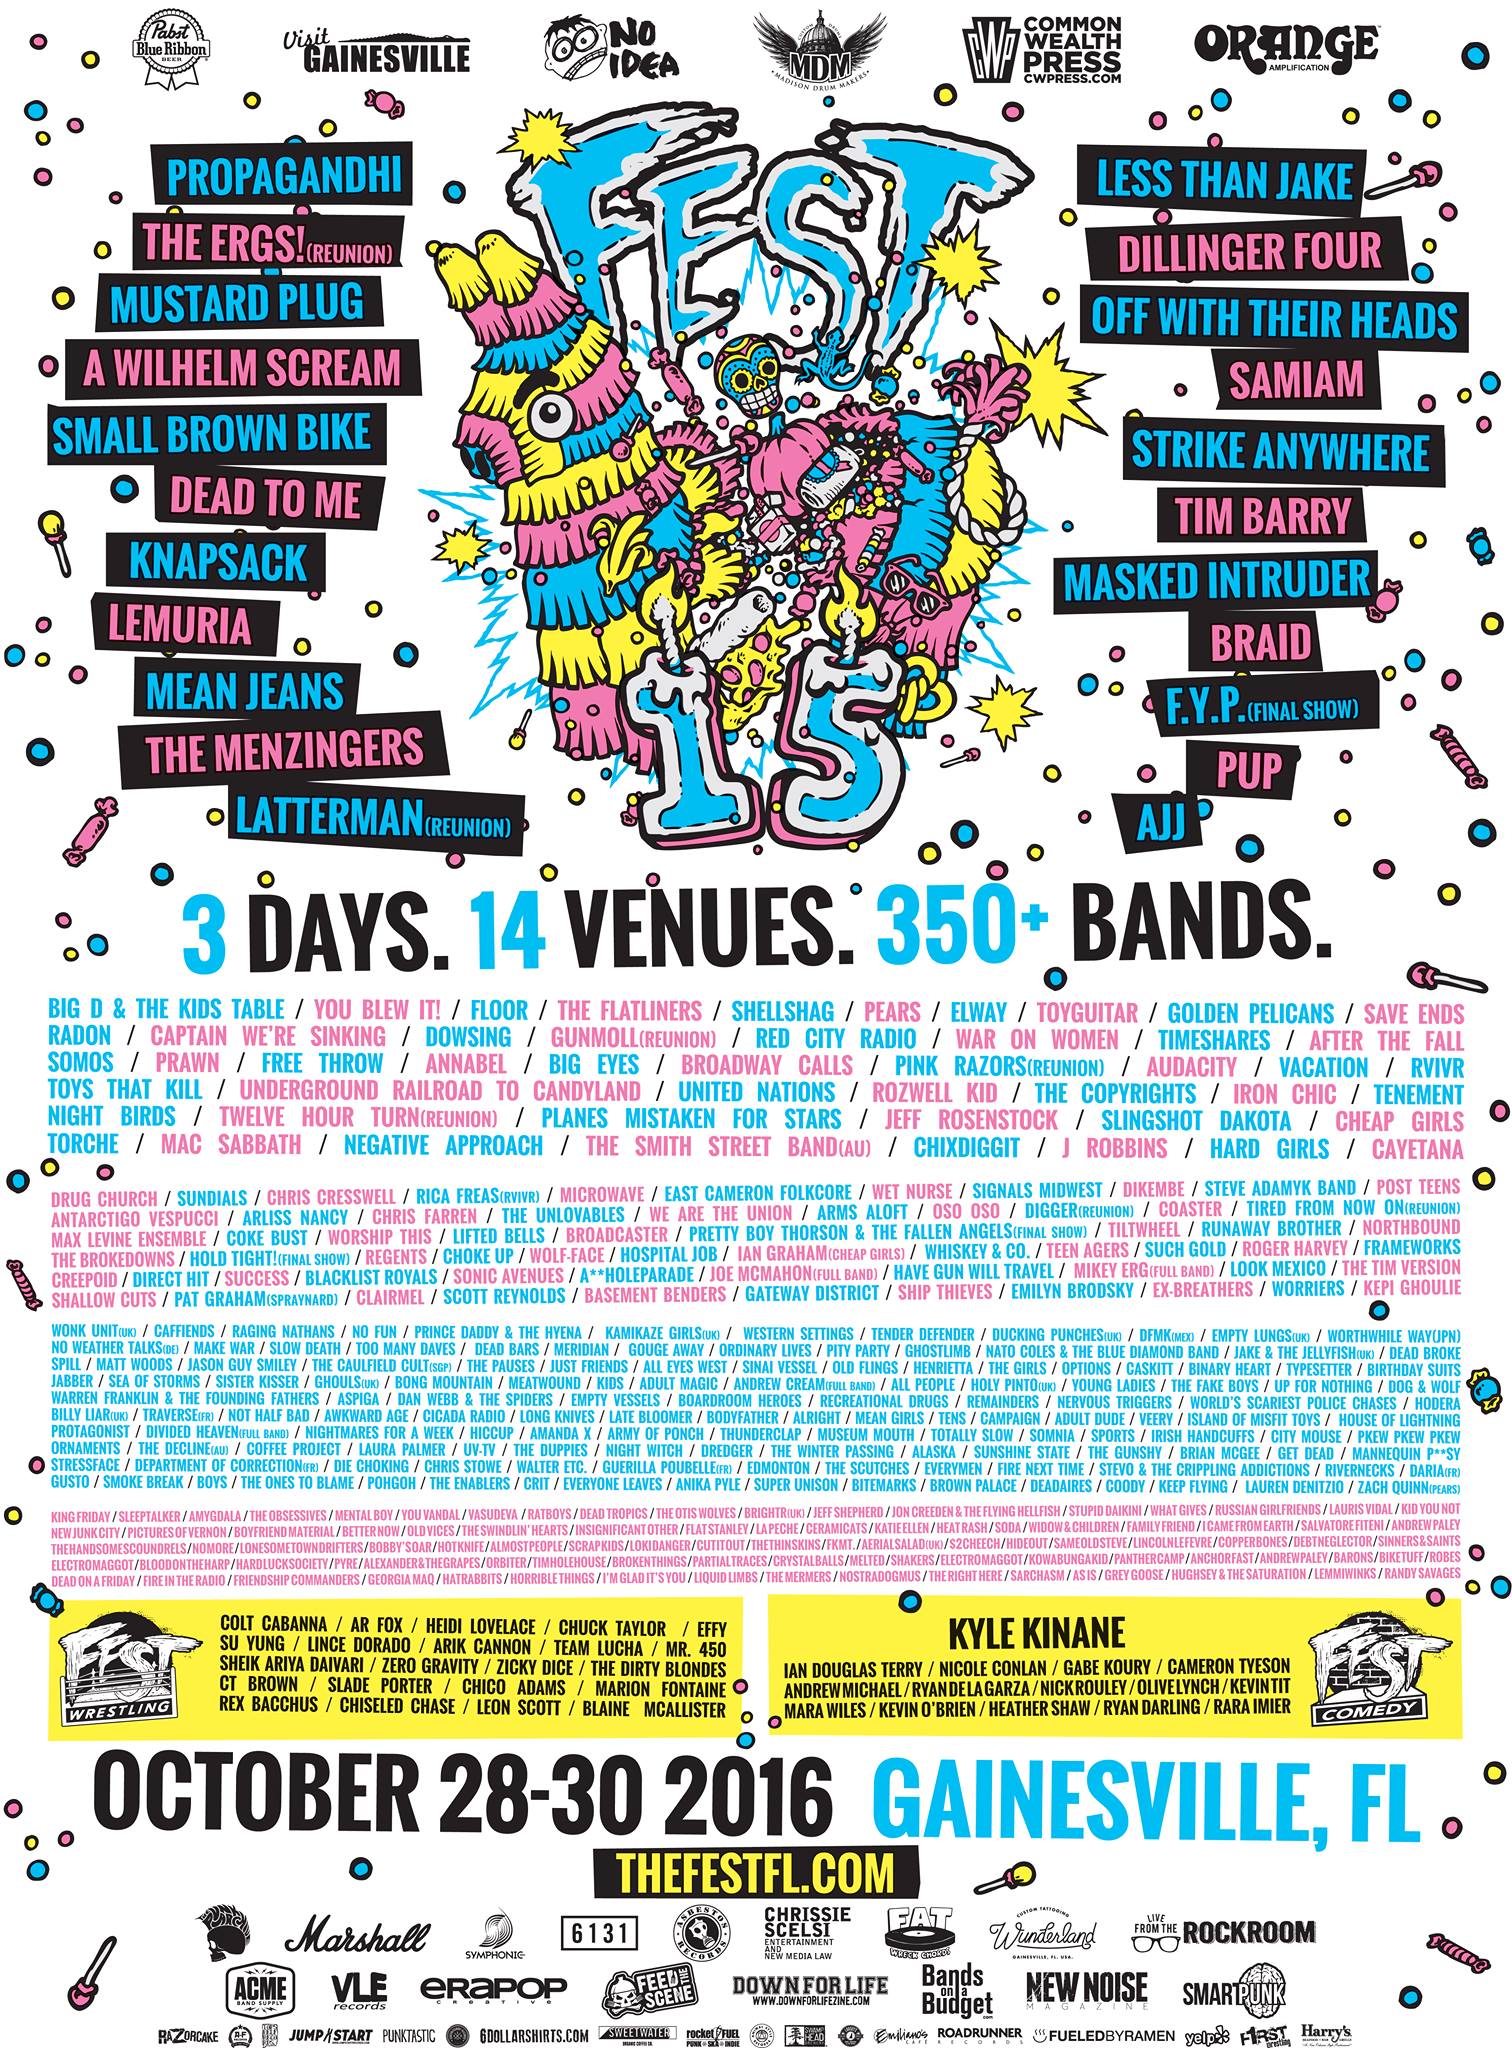 THE FEST 2016 Lineup poster image